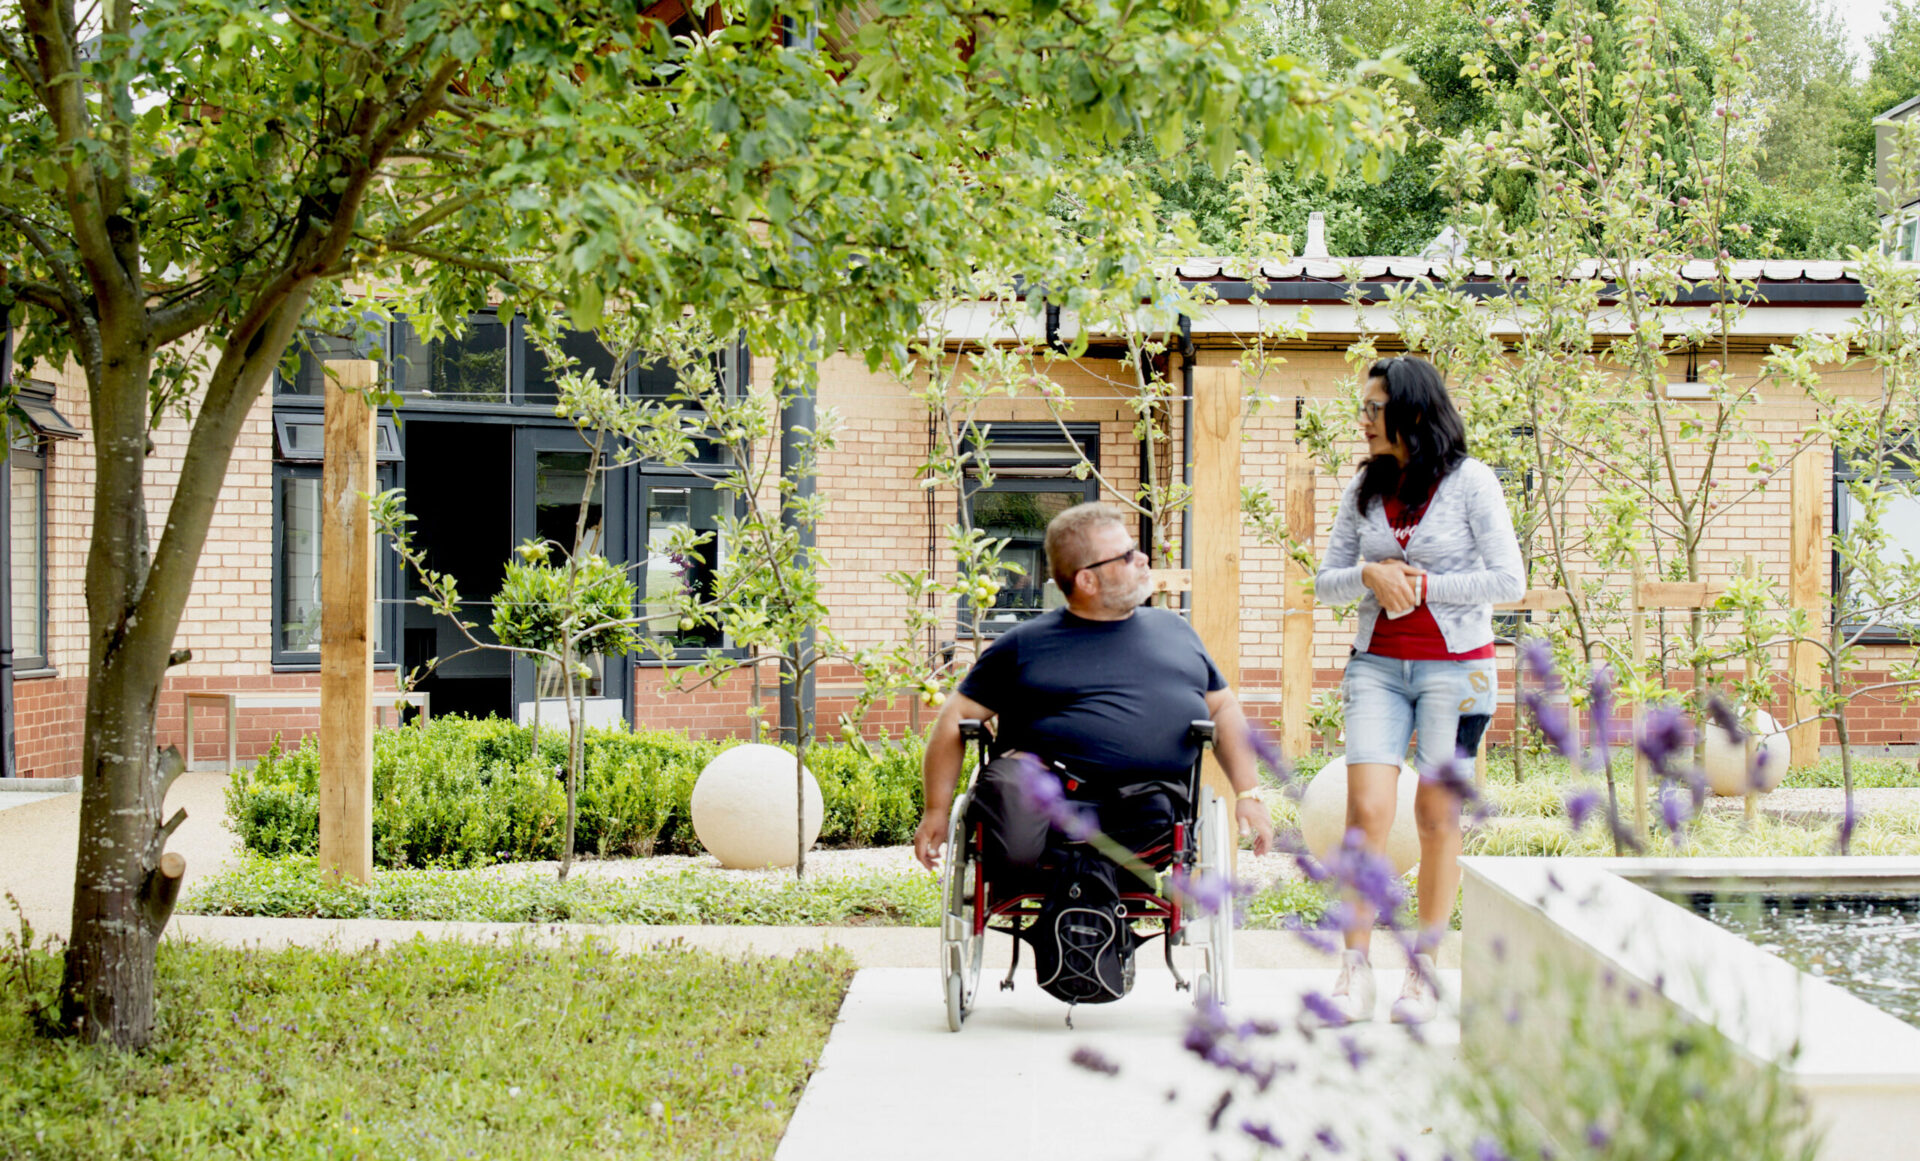 Man in wheelchair and woman talking in a garden